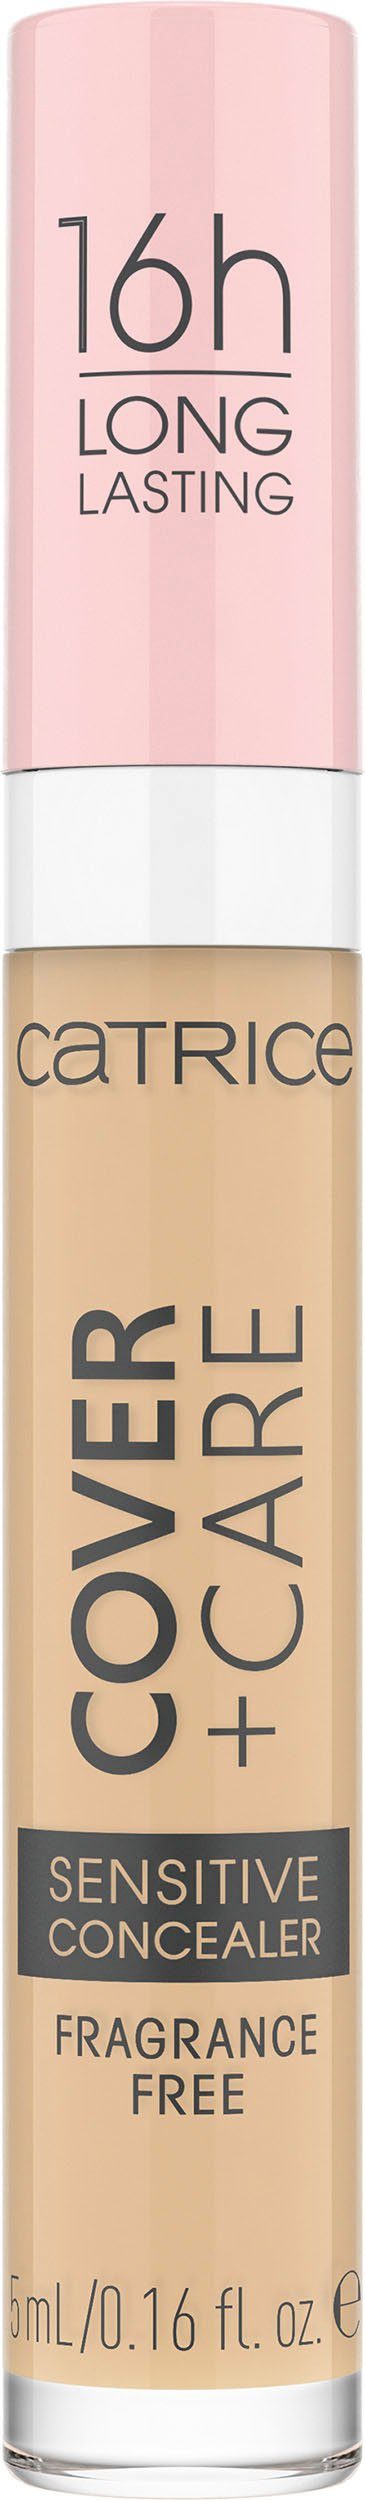 Catrice Concealer 3-tlg. Catrice Concealer, Cover 008W nude + Care Sensitive